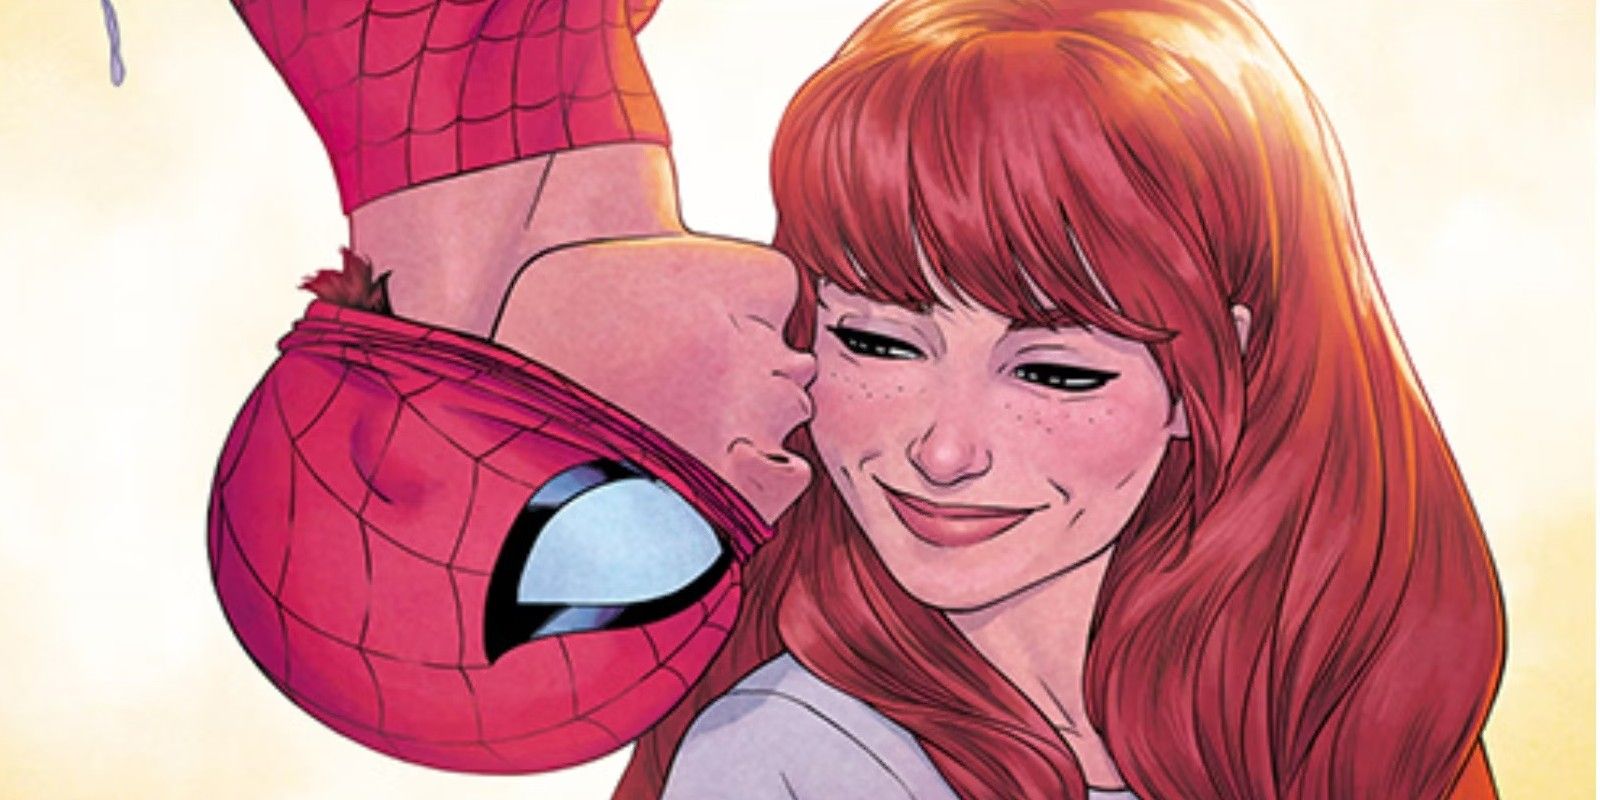 Spider-Man kisses Mary Jane Watson on the cheek in Marvel Comics